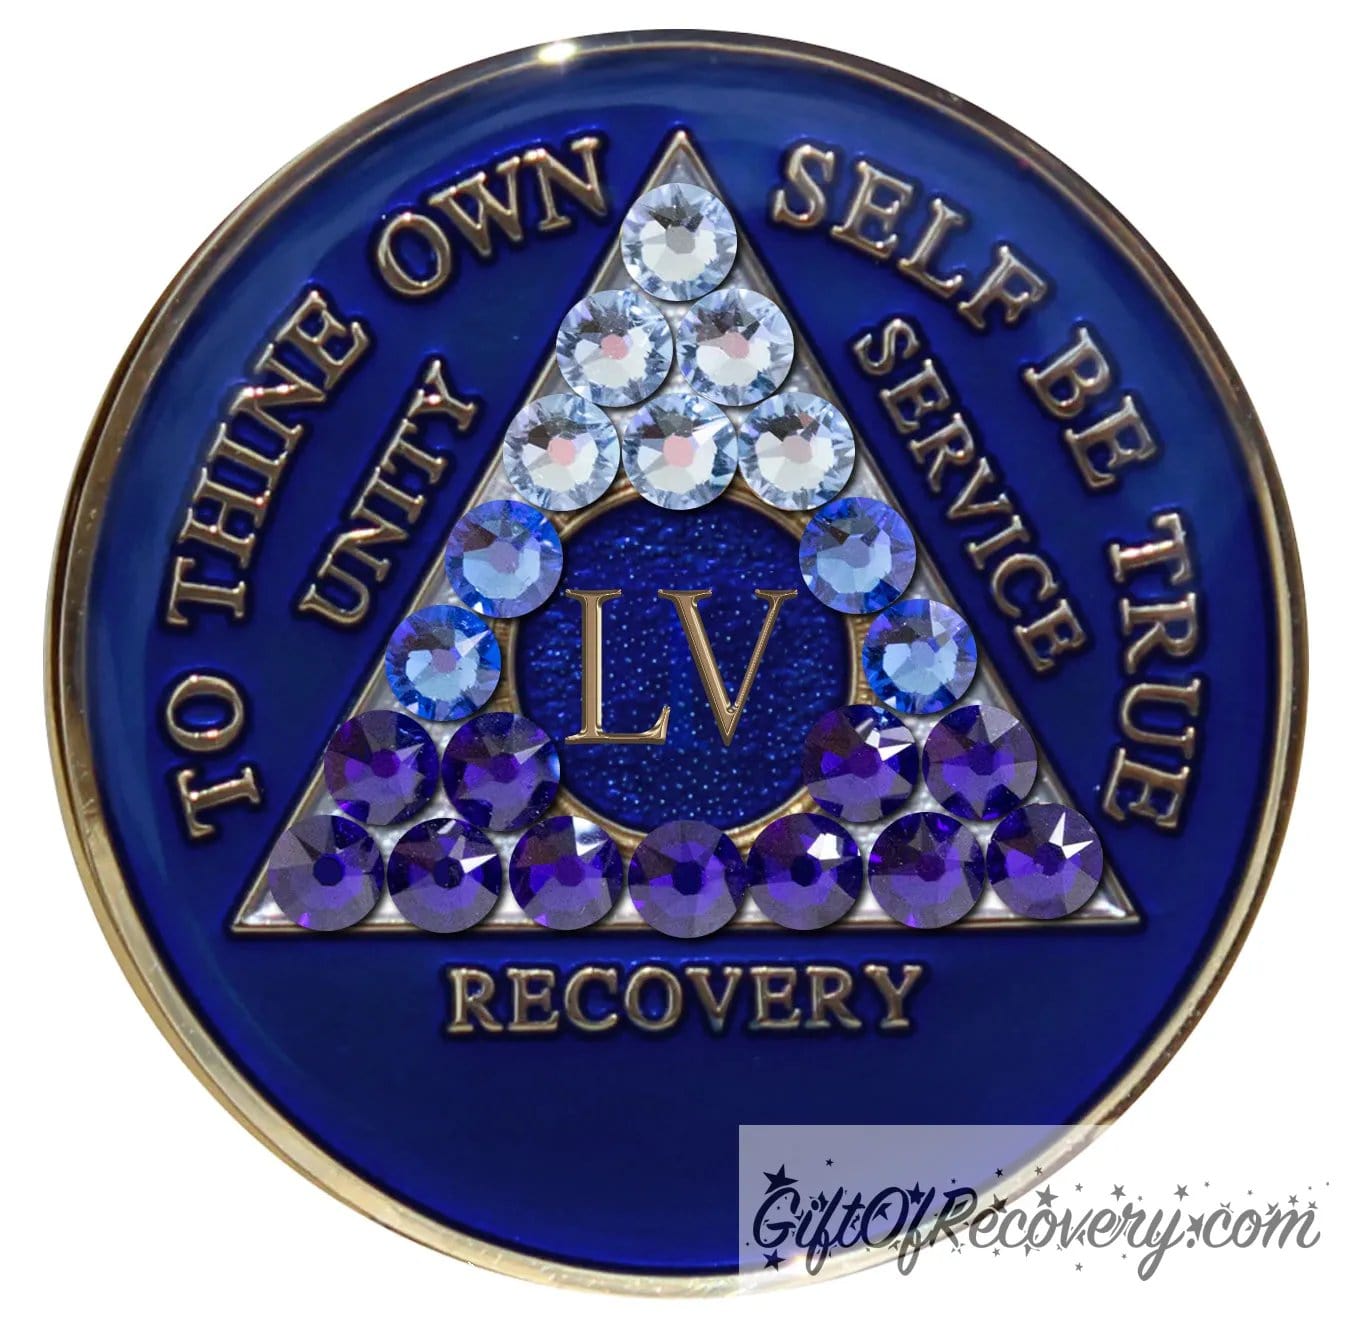 55 year Big Book Blue AA medallion with 21 genuine crystals forming the triangle, going from light to dark blue to represent transitions in your recovery journey, the center circle is blue sparkle, with the roman numeral, AA moto and rim in 14k gold plated brass and resin sealed for a glossy finish.